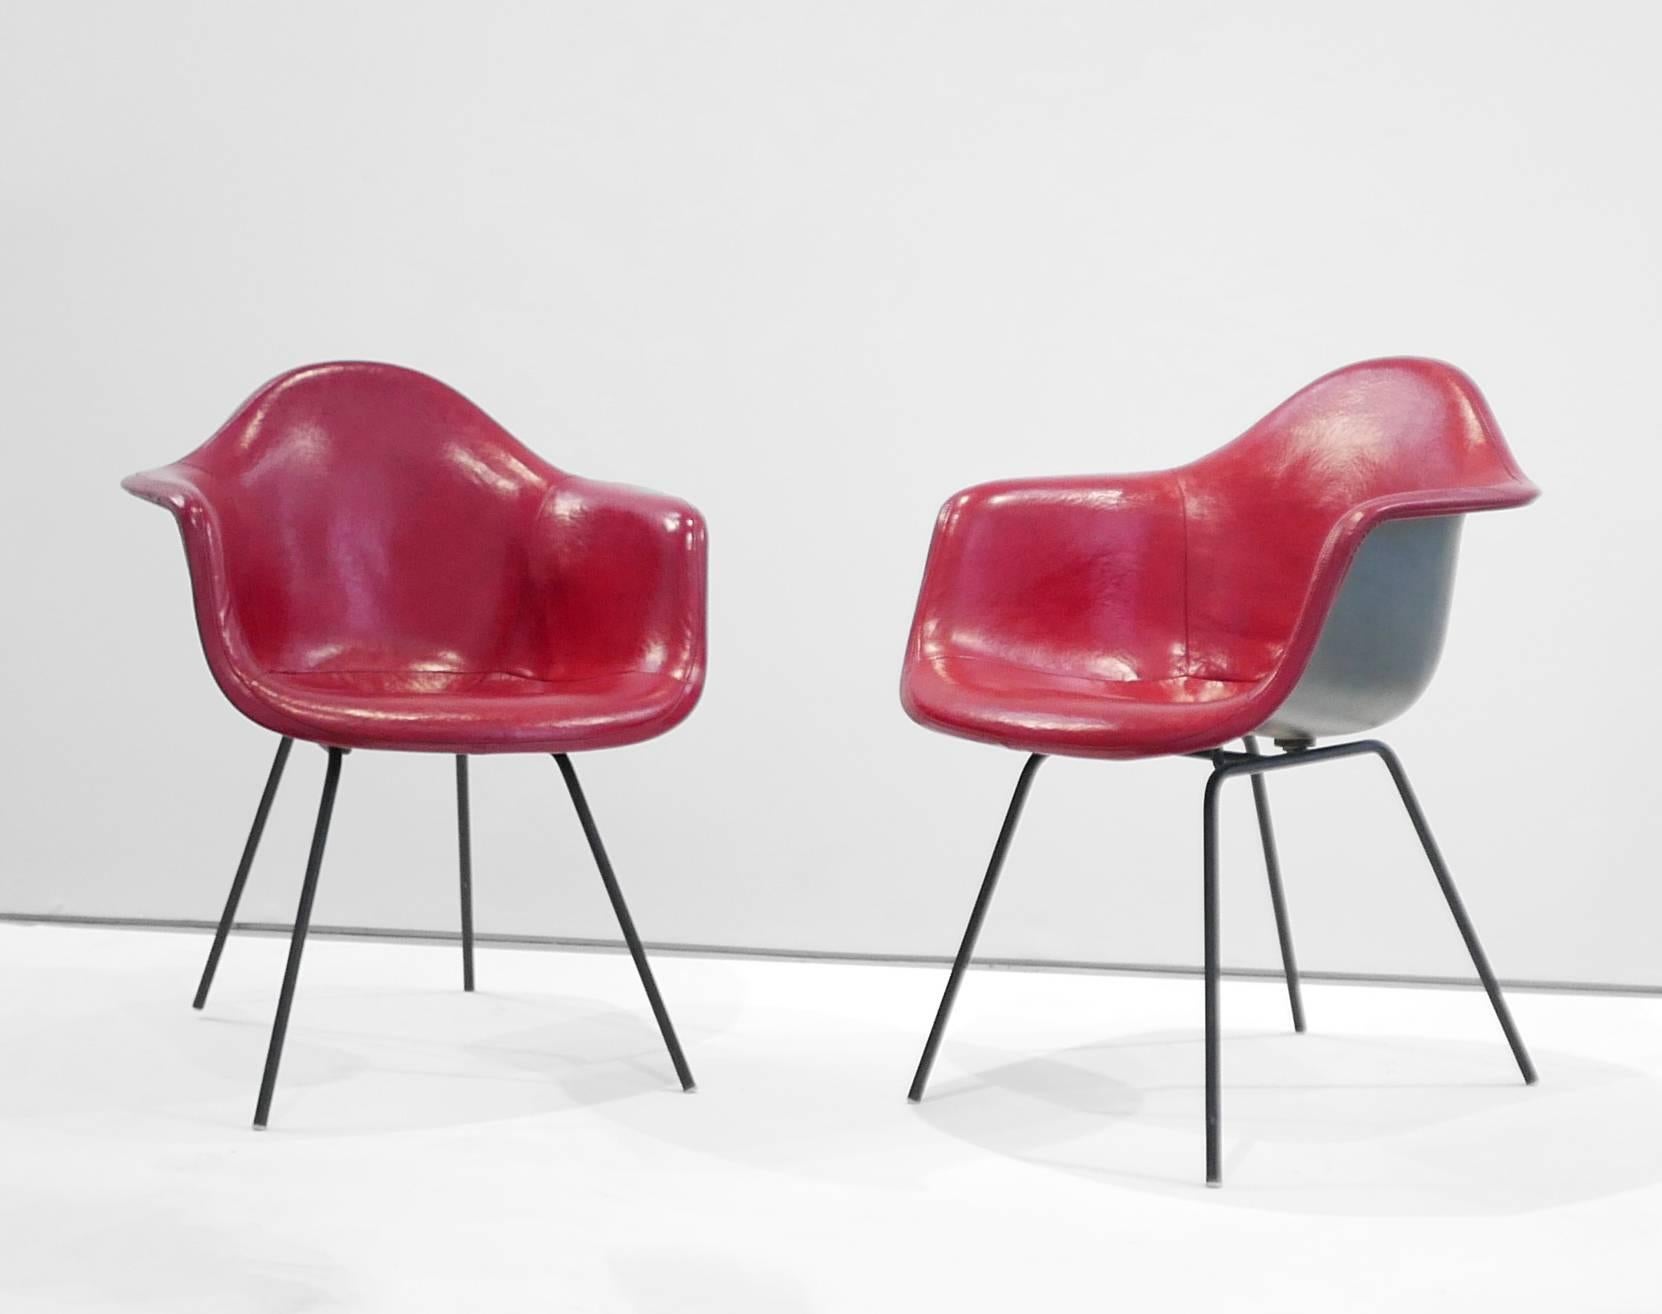 Charles and Ray Eames
Pair of 'DAX' chairs

The DAX chairs were designed by Charles and Ray Eames and was manufactured in the United States by Herman Miller in 1955. It is made from fiberglass and features a black enameled steel base. It belongs